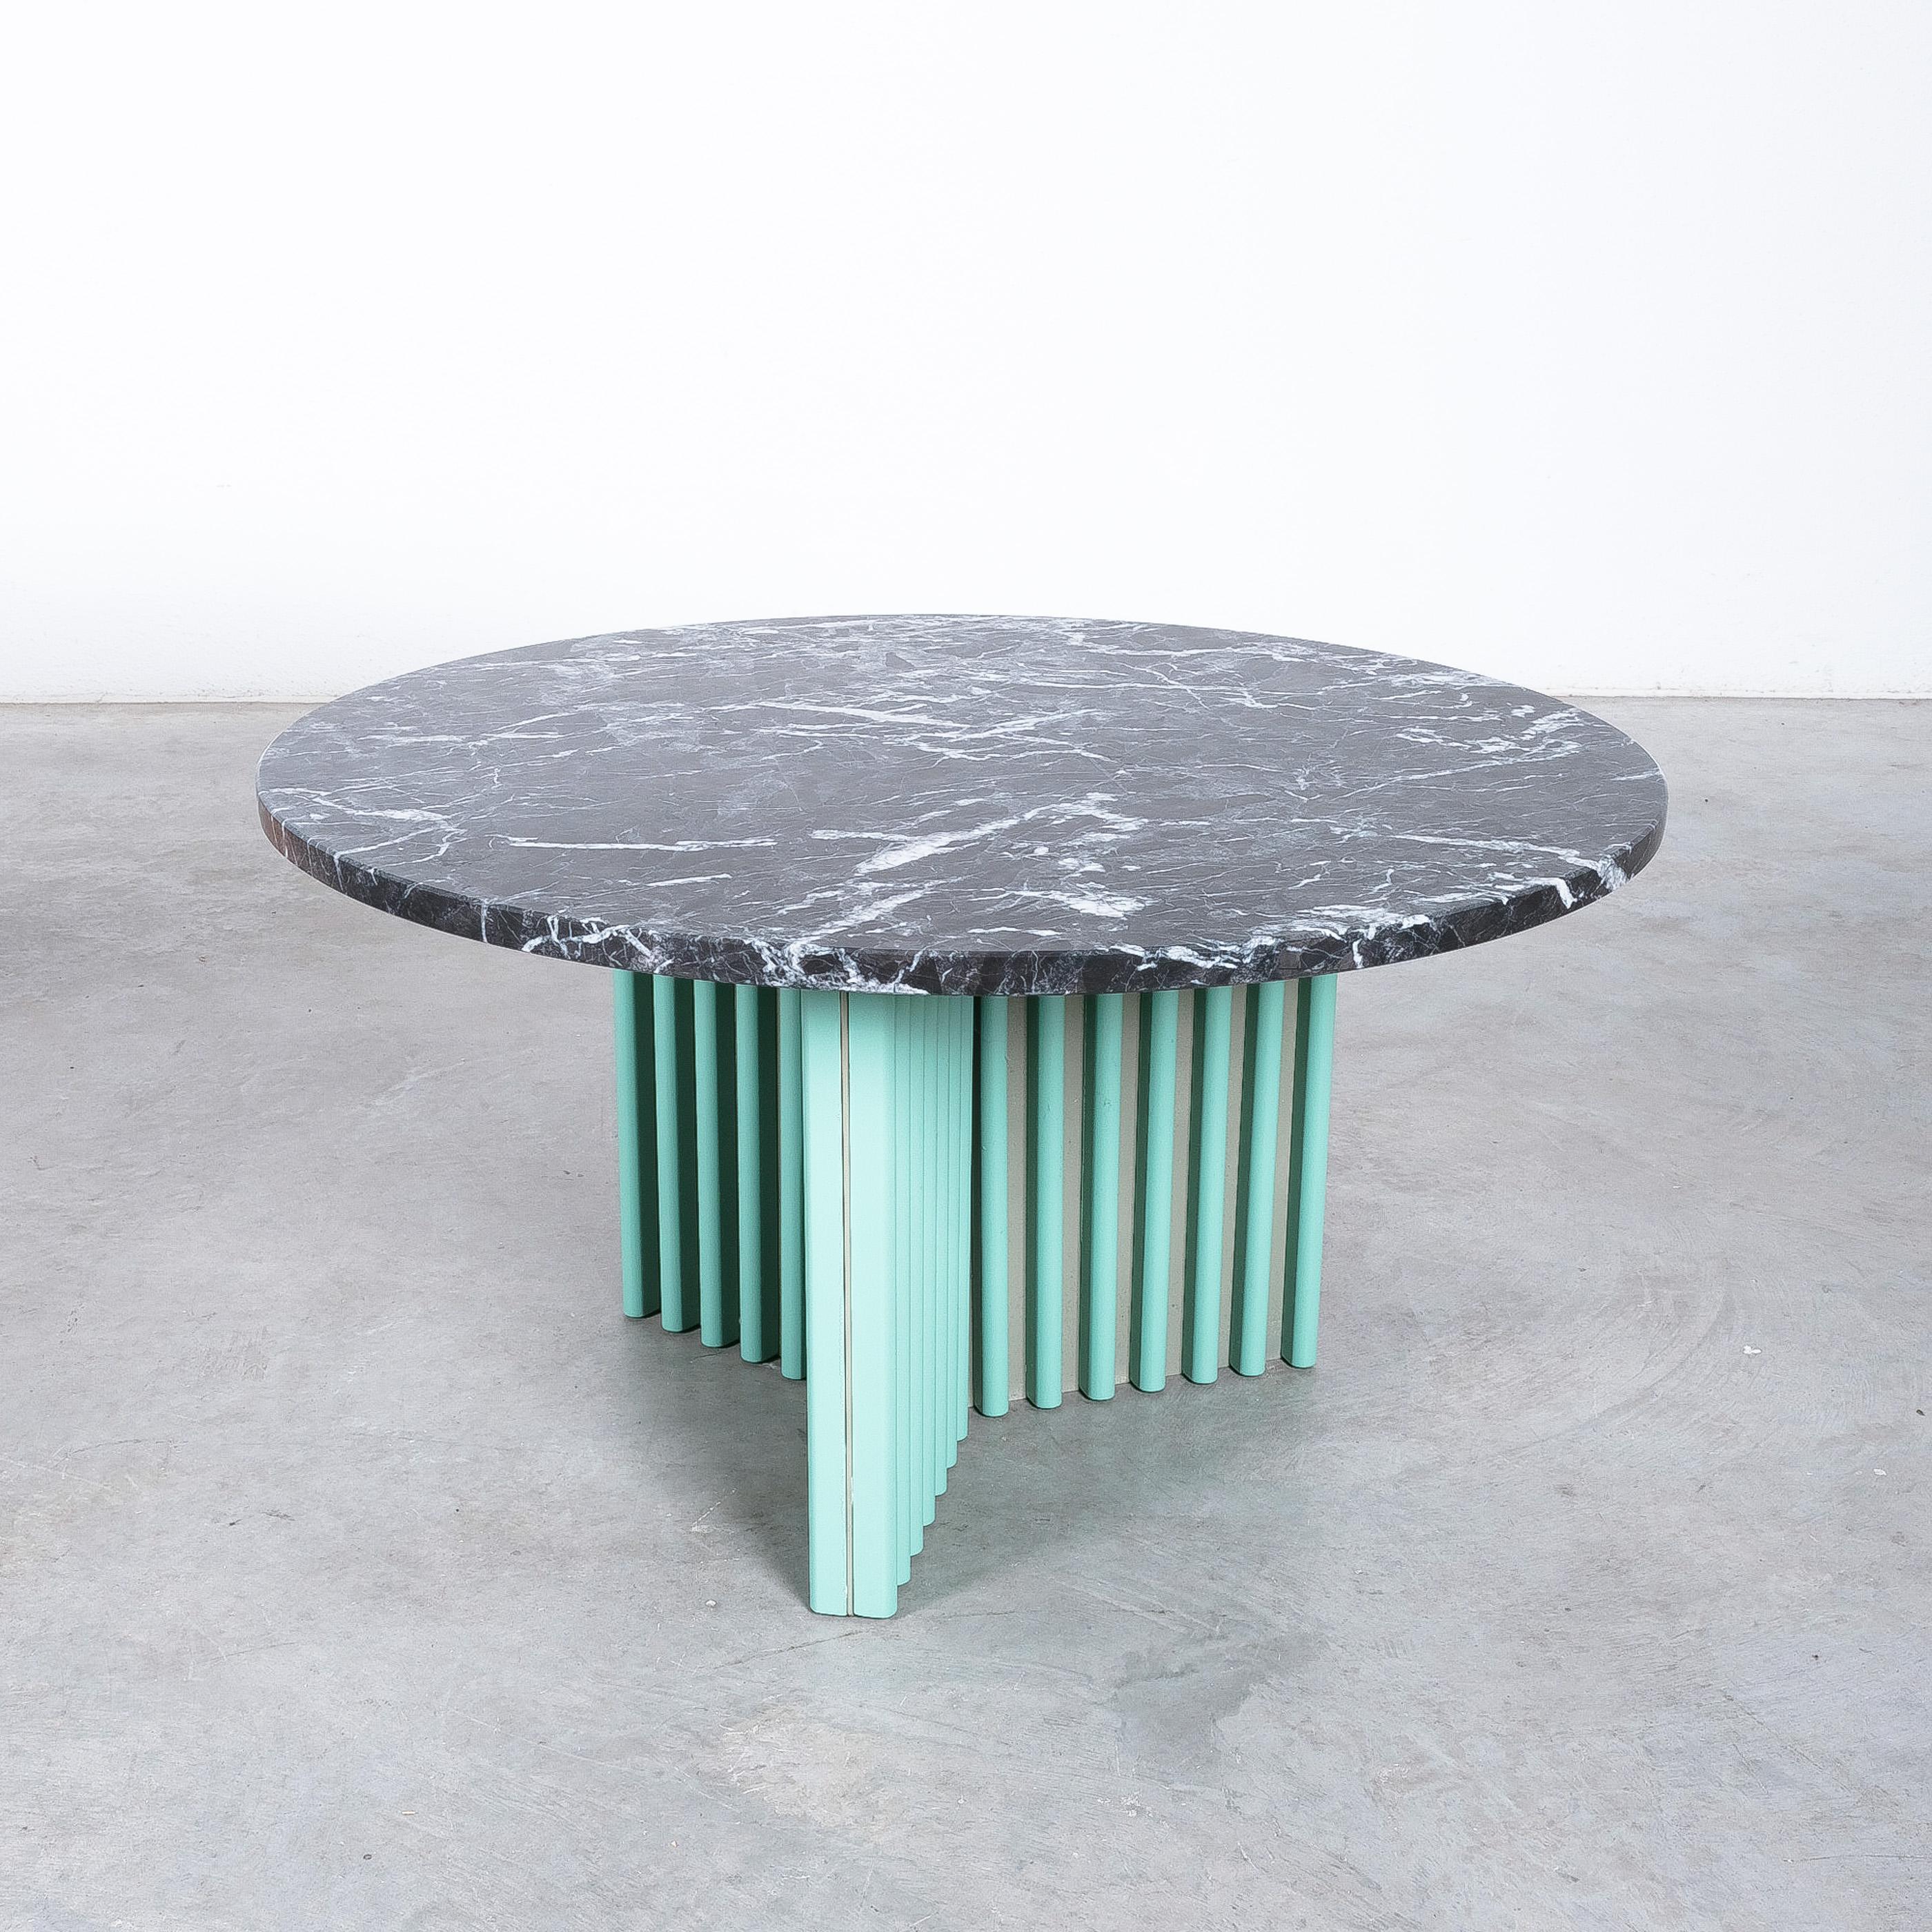 Steel Bespoke Black Marble Carrara Tables Side Tables, France, circa 1990 For Sale